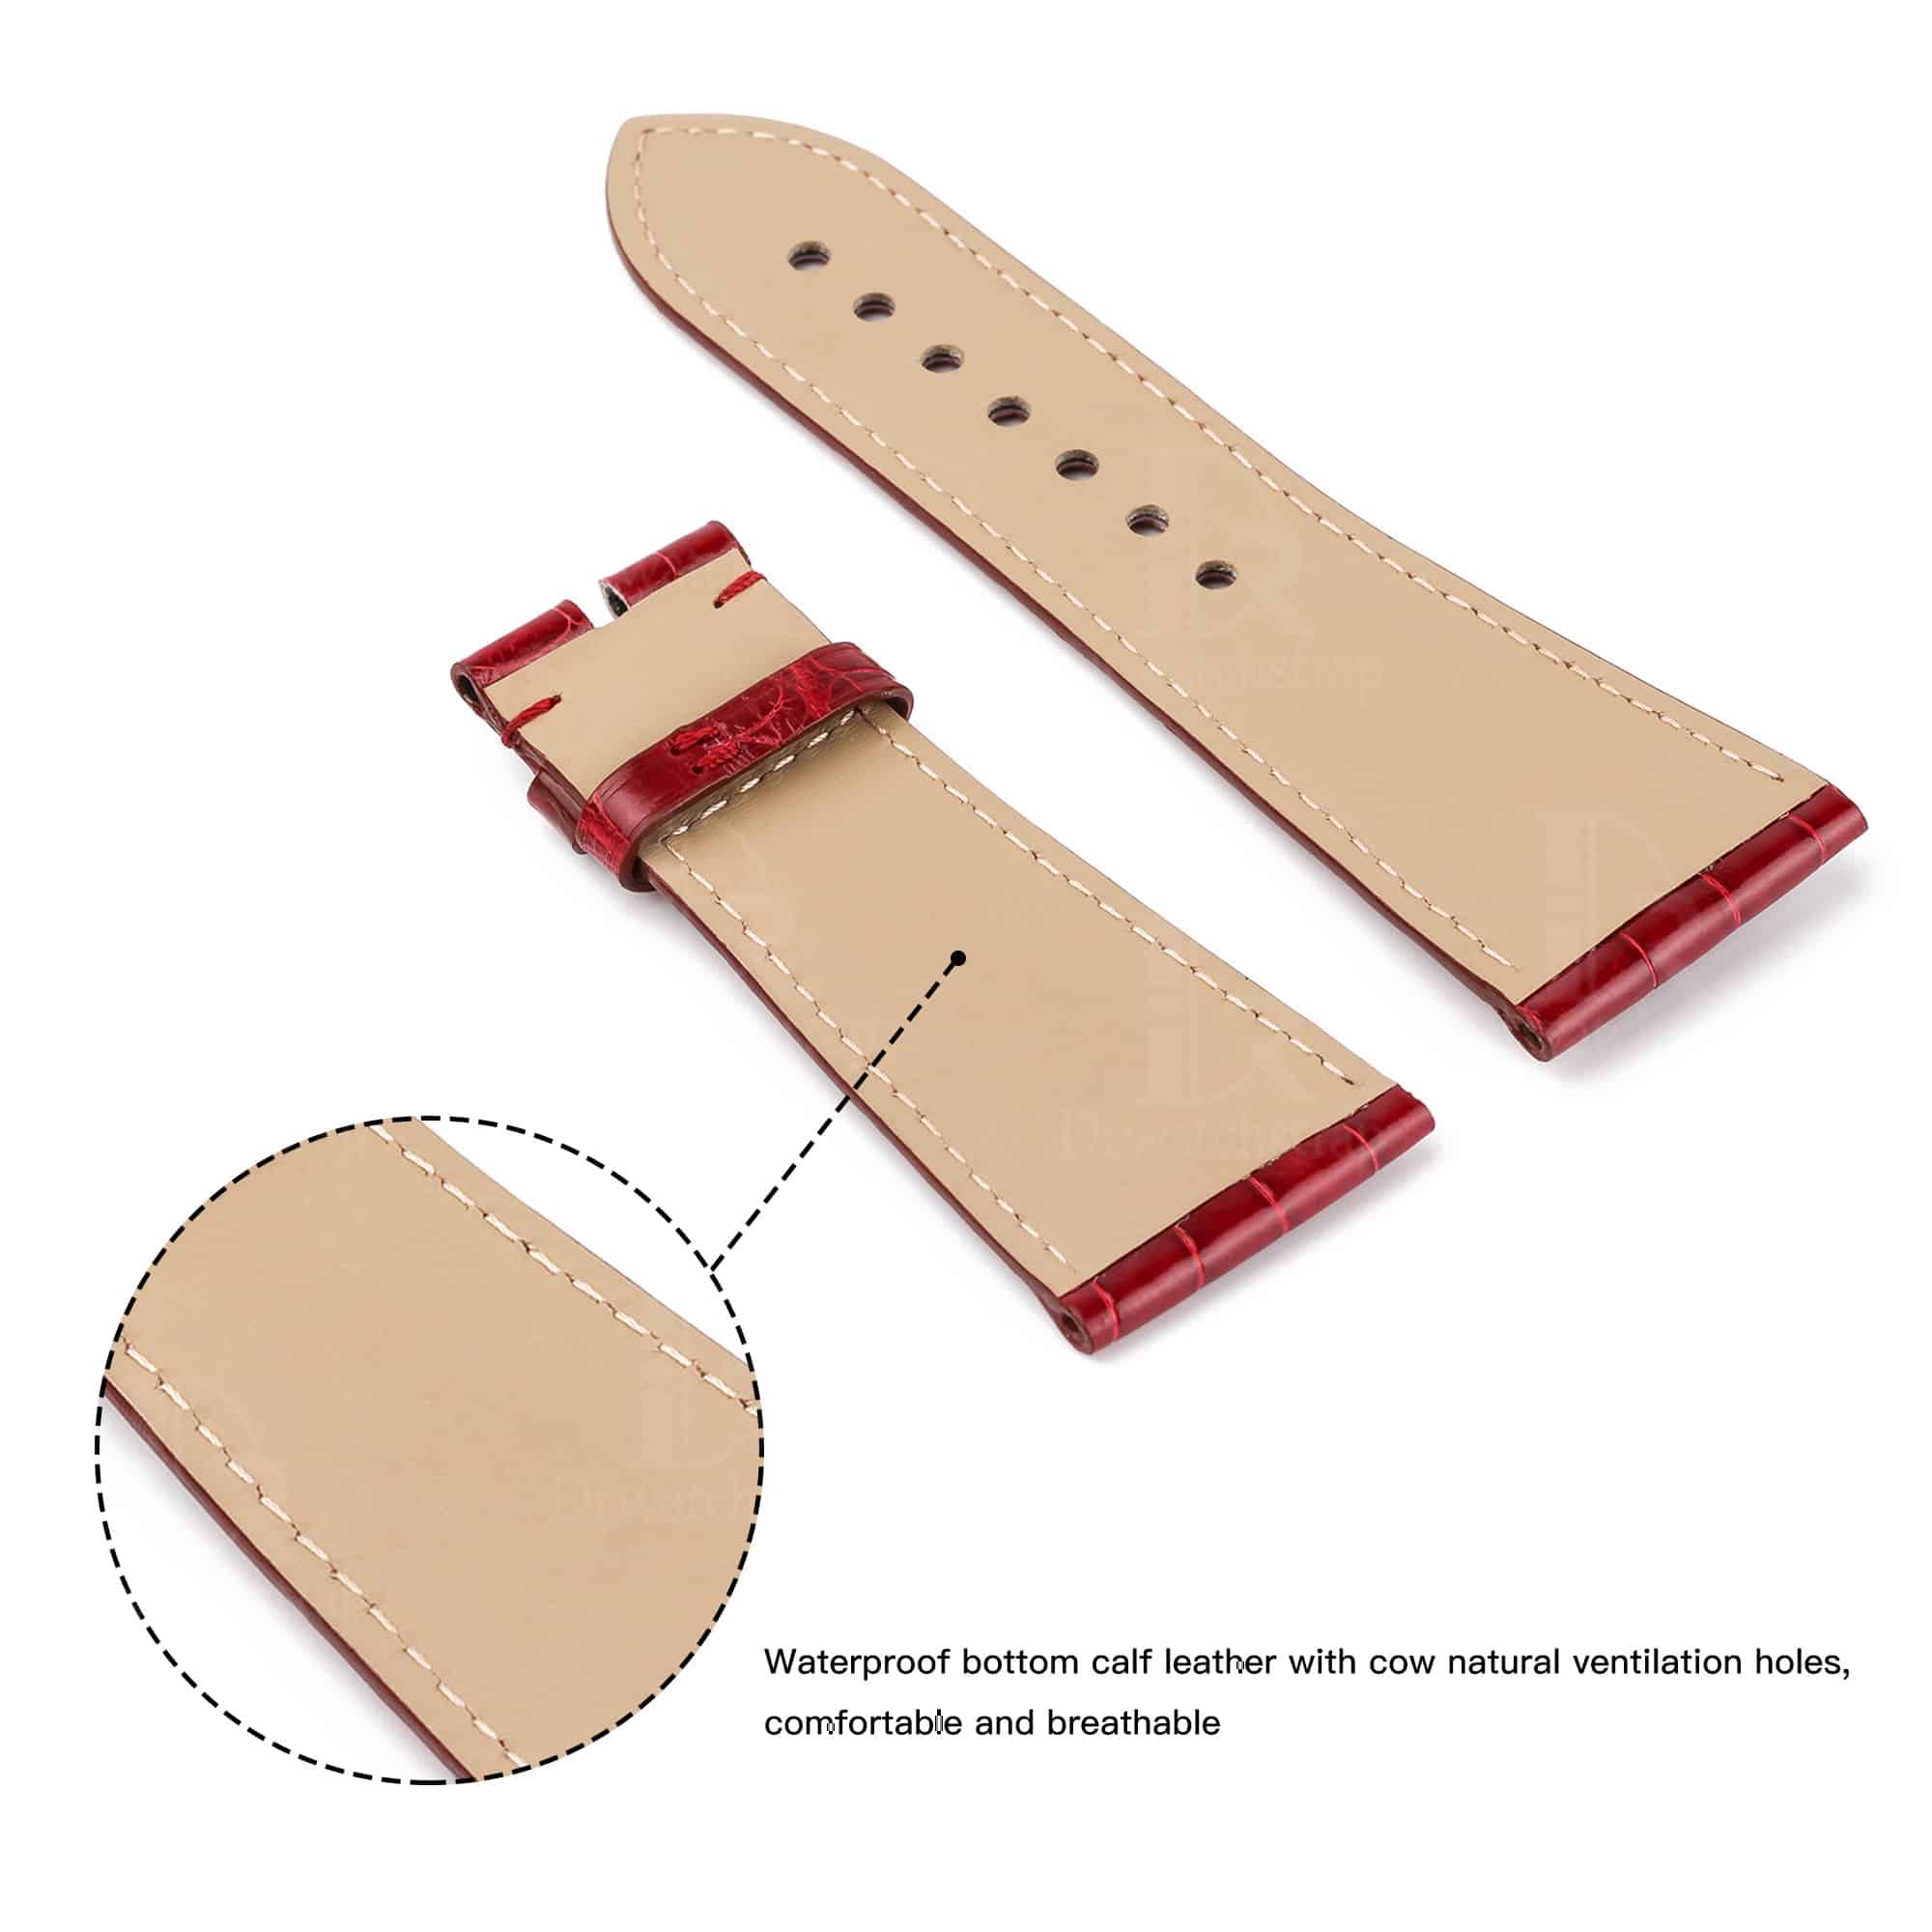 Genuine high-end quality custom OEM red Alligator leather watch strap & watchband replacement for Cartier Tank Divan men's and ladies' luxury watches - 100% handmade custom best quality Grade A Crocodile Cartier straps and watch bands from DR Watchstrap at low price